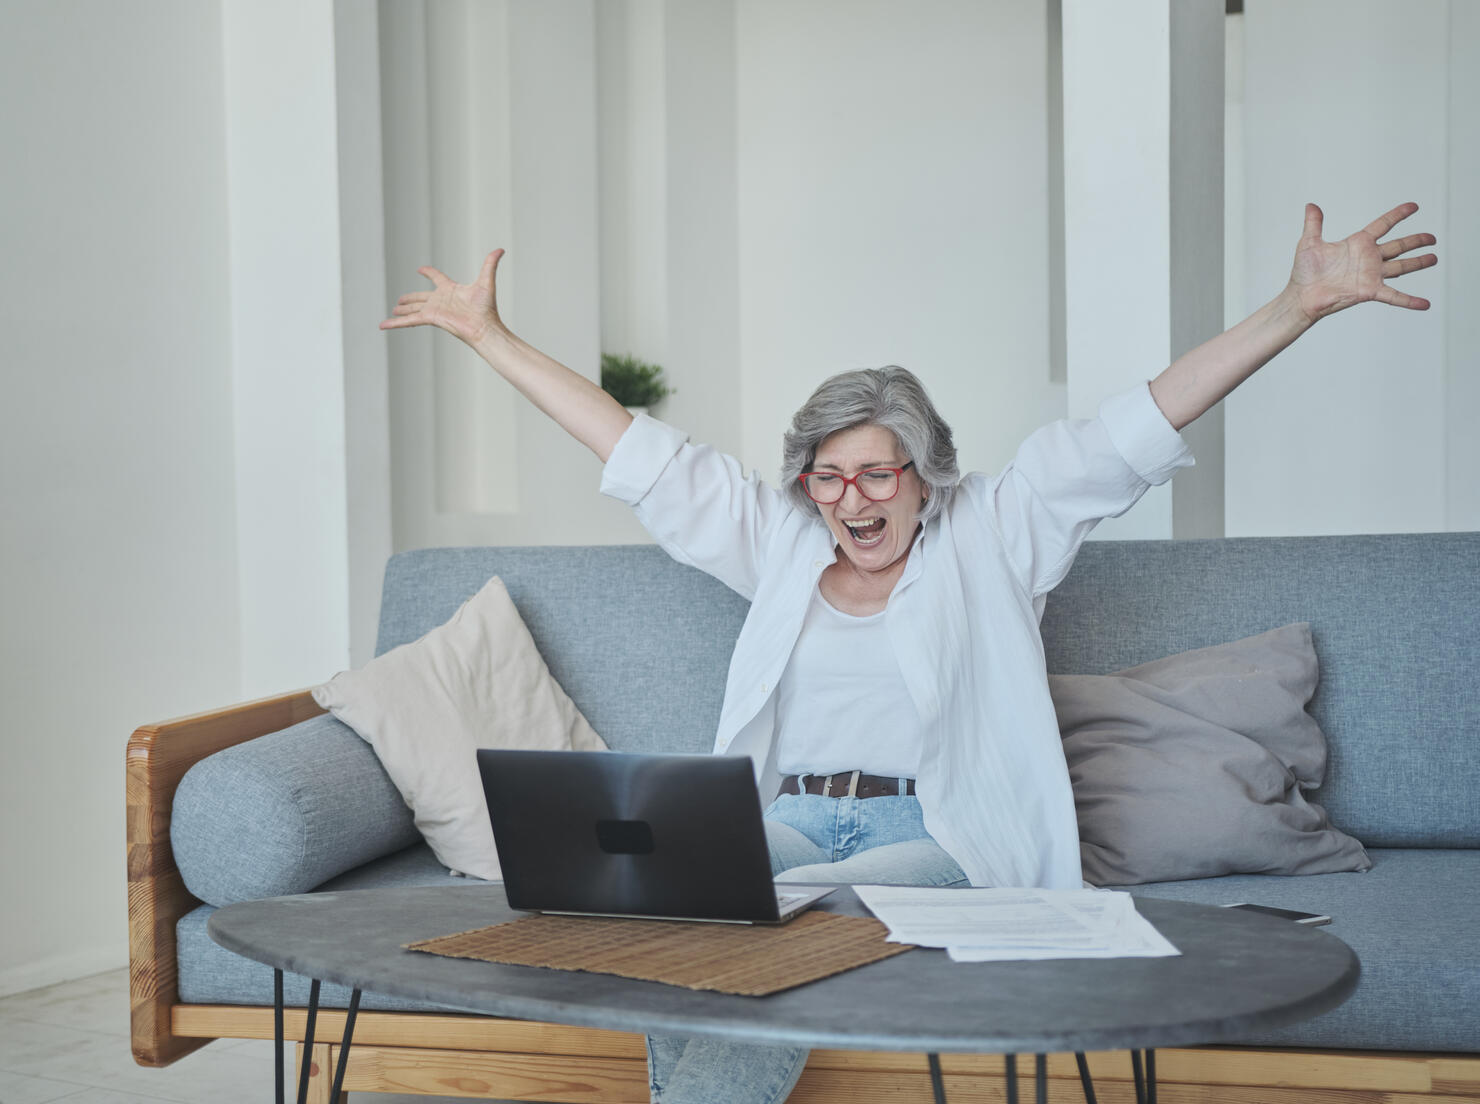 An excited senior woman is actively rejoicing and expressing her emotions about winning the online lottery